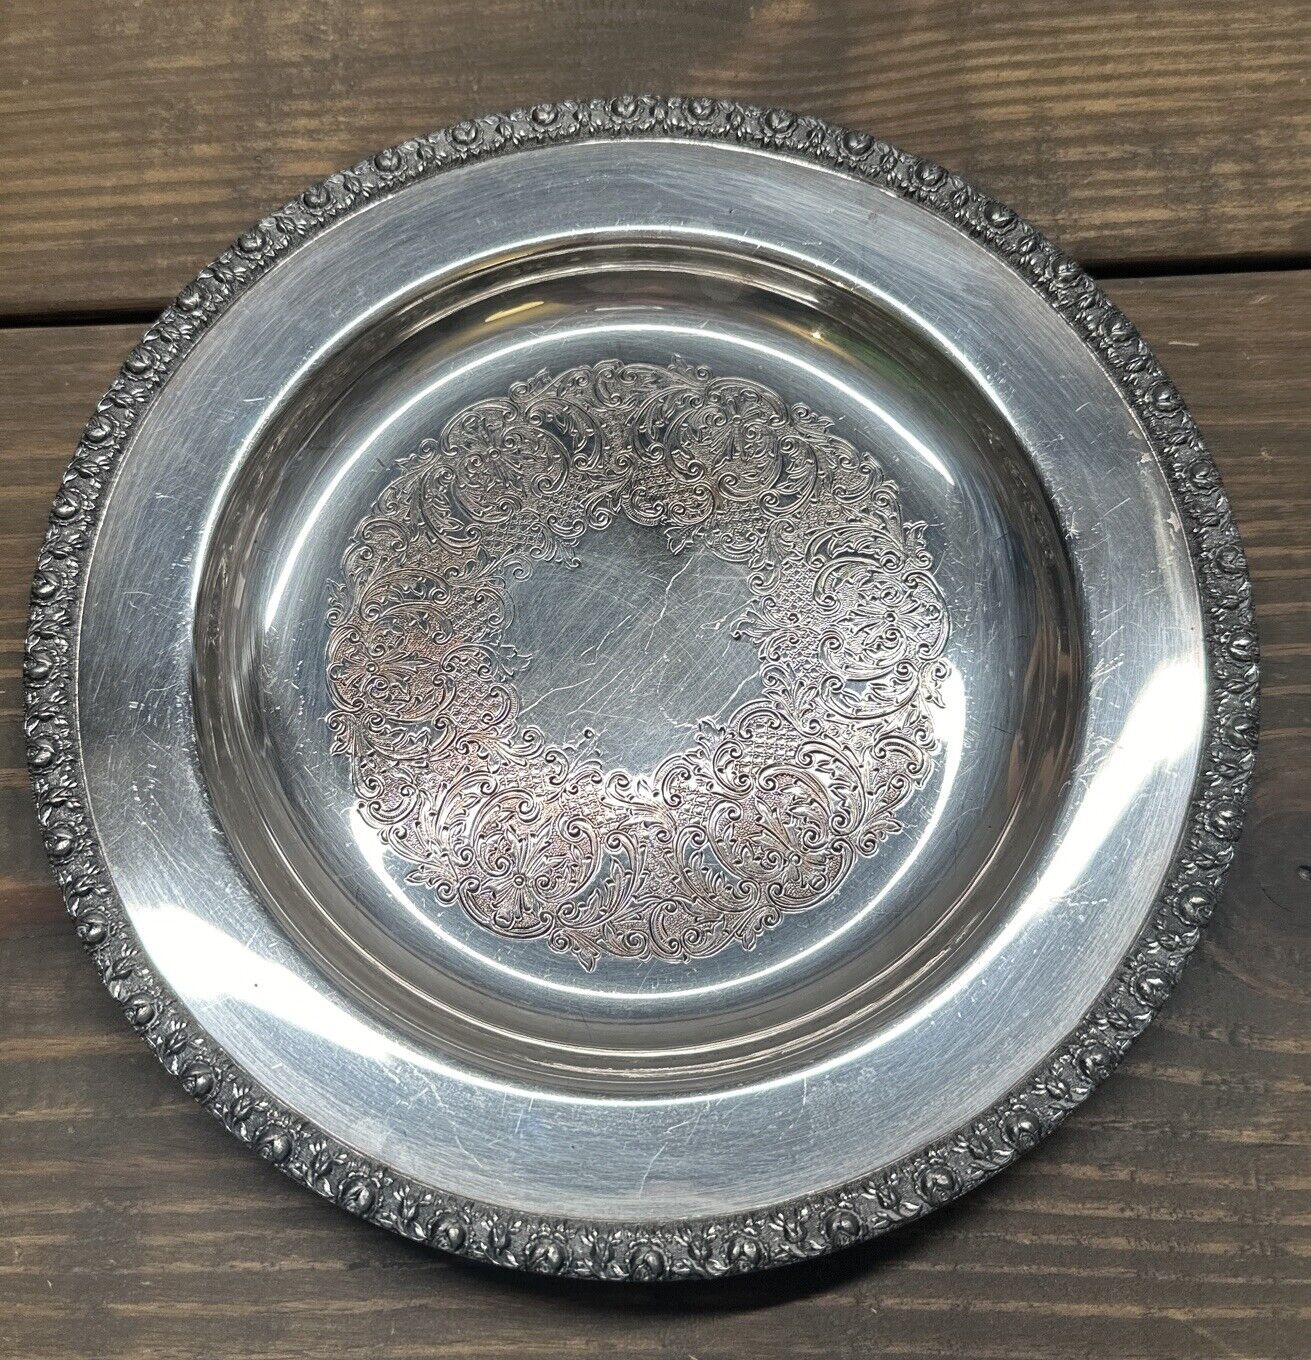 Vintage Gotham Silver on Copper Round Tray/Plate 9.5” New York, 1920-1950 #19R